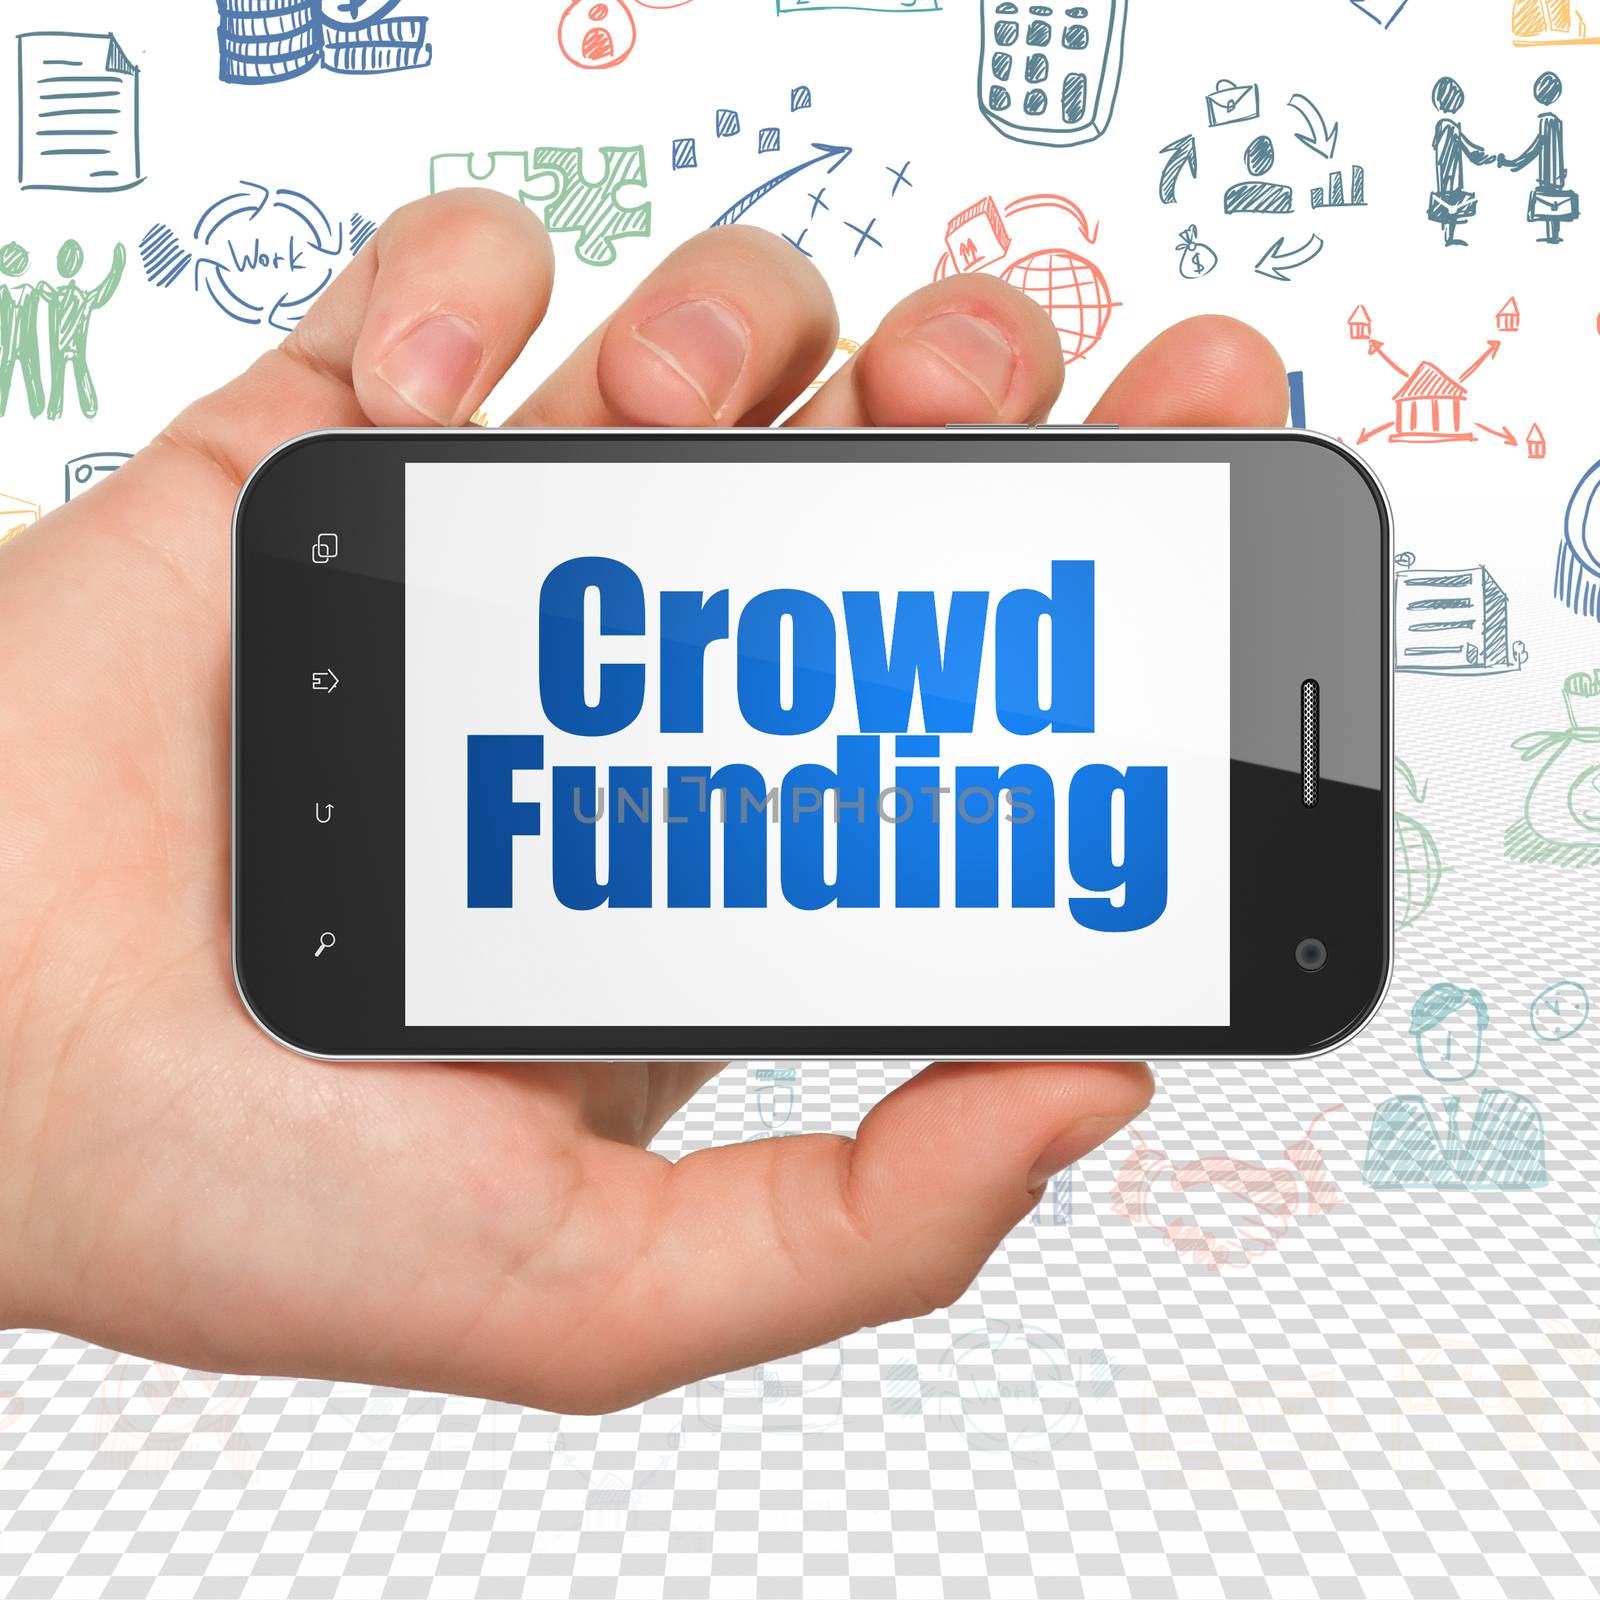 Business concept: Hand Holding Smartphone with  blue text Crowd Funding on display,  Hand Drawn Business Icons background, 3D rendering